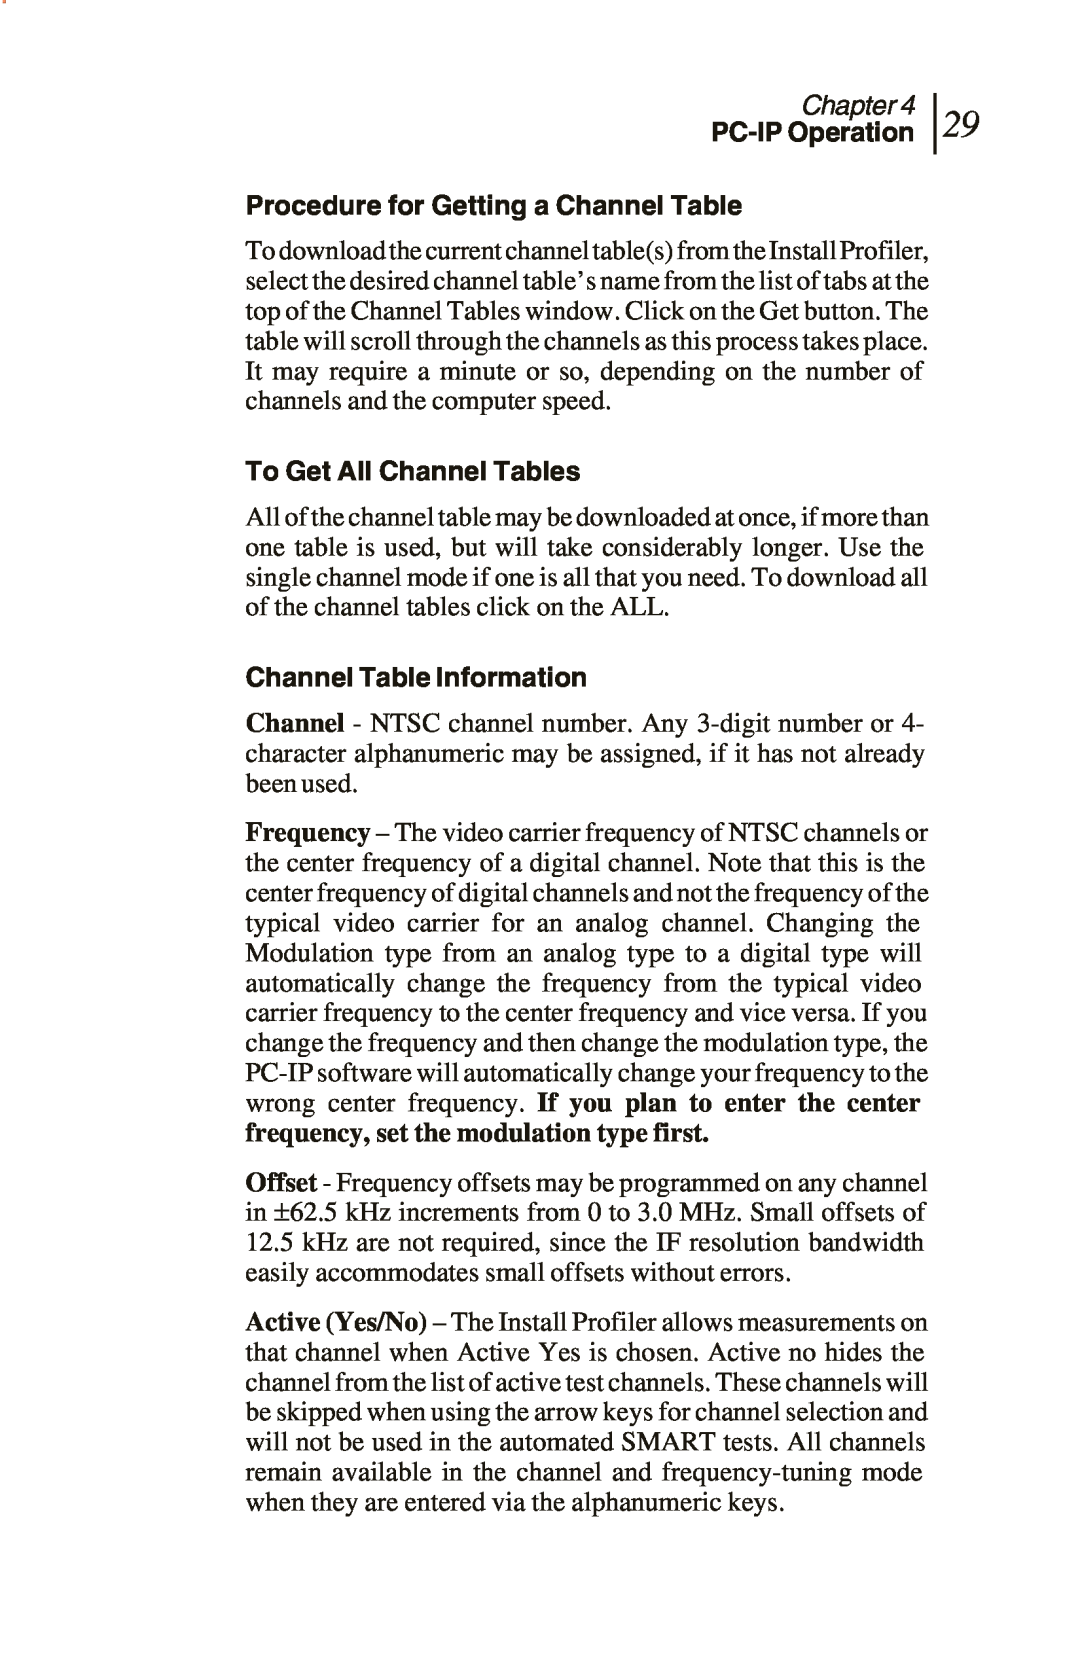 Sunrise Global CM250 IP manual Procedure for Getting a Channel Table, To Get All Channel Tables, Channel Table Information 